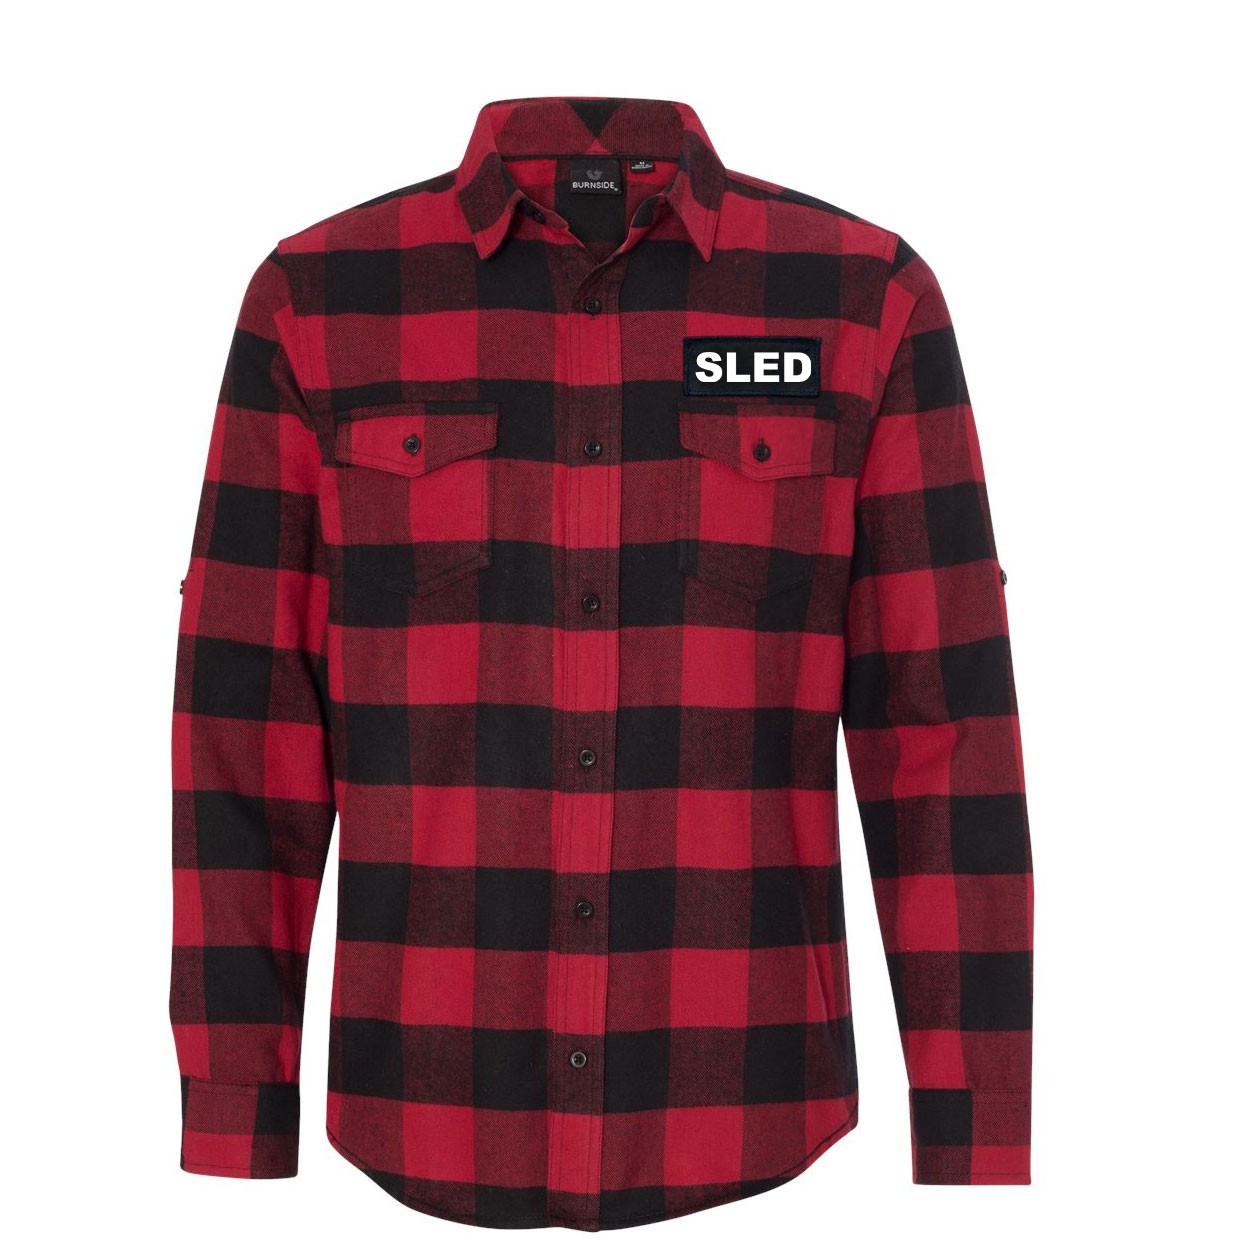 Sled Brand Logo Night Out Rectangle Woven Patch Flannel Shirt Long Sleeve Red/Black Buffalo